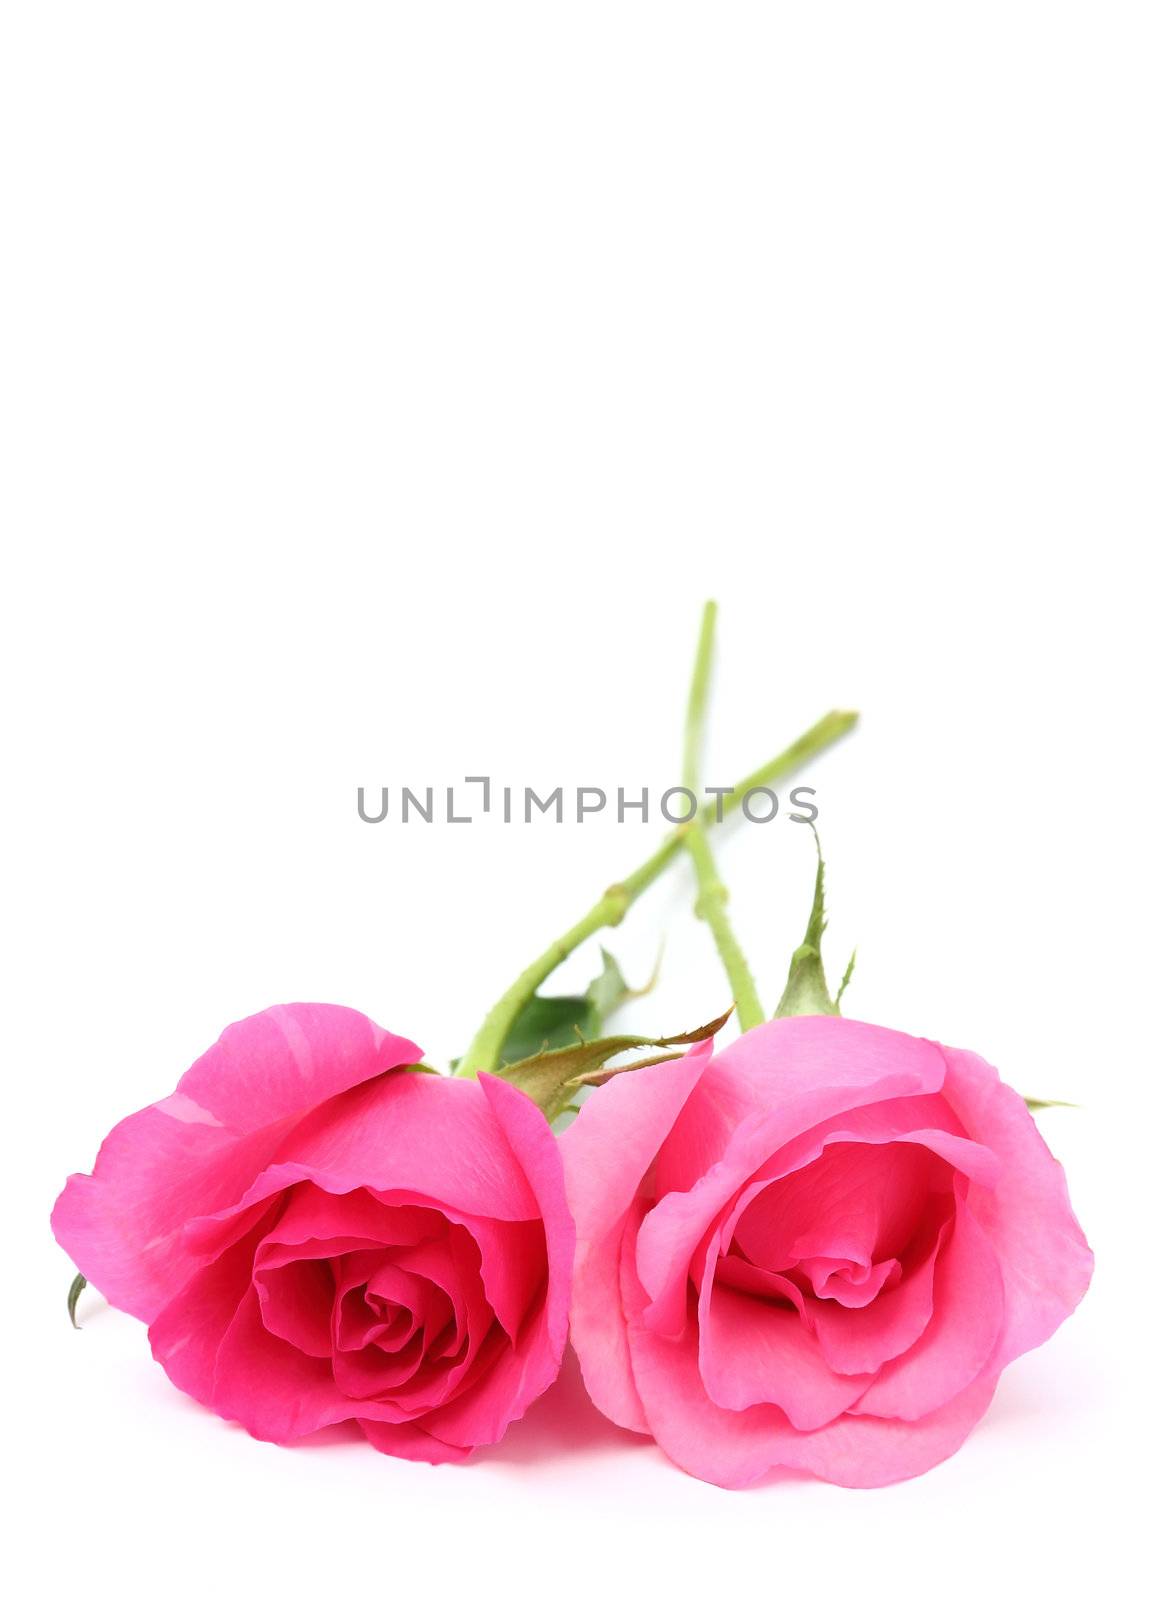 Two pink roses on white background with space for text